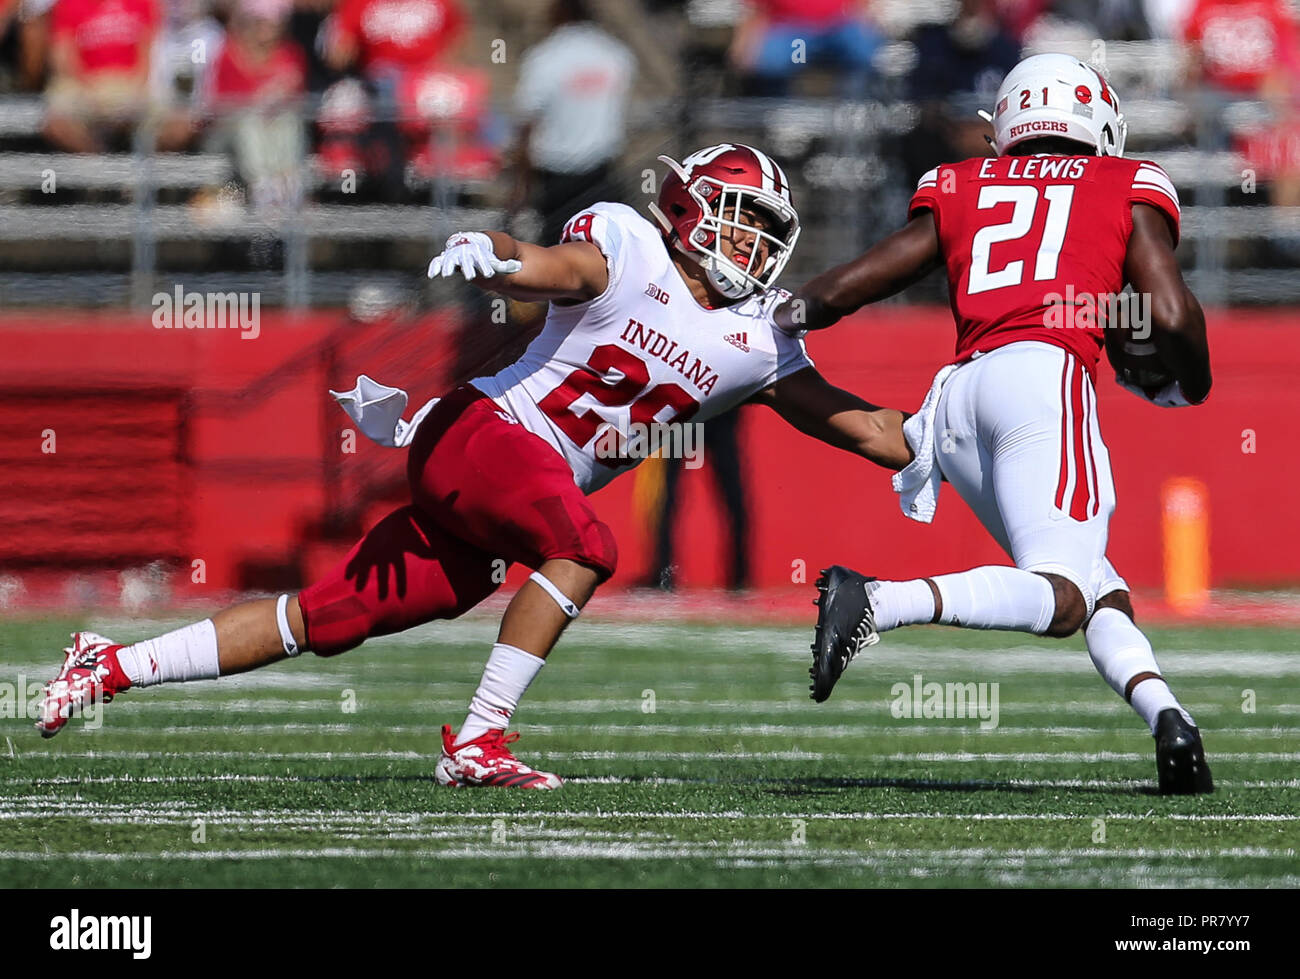 Piscataway, NJ, USA. 29th Sep, 2018. Rutgers Scarlet Knights wide receiver Eddie Lewis (21) tries to get around Indiana Hoosiers defensive back Khalil Bryant (29) during an NCAA football game between the Indiana Hoosiers and the Rutgers Scarlet Knights at HighPoint Solutions Stadium in Piscataway, NJ. Mike Langish/Cal Sport Media. Credit: csm/Alamy Live News Stock Photo